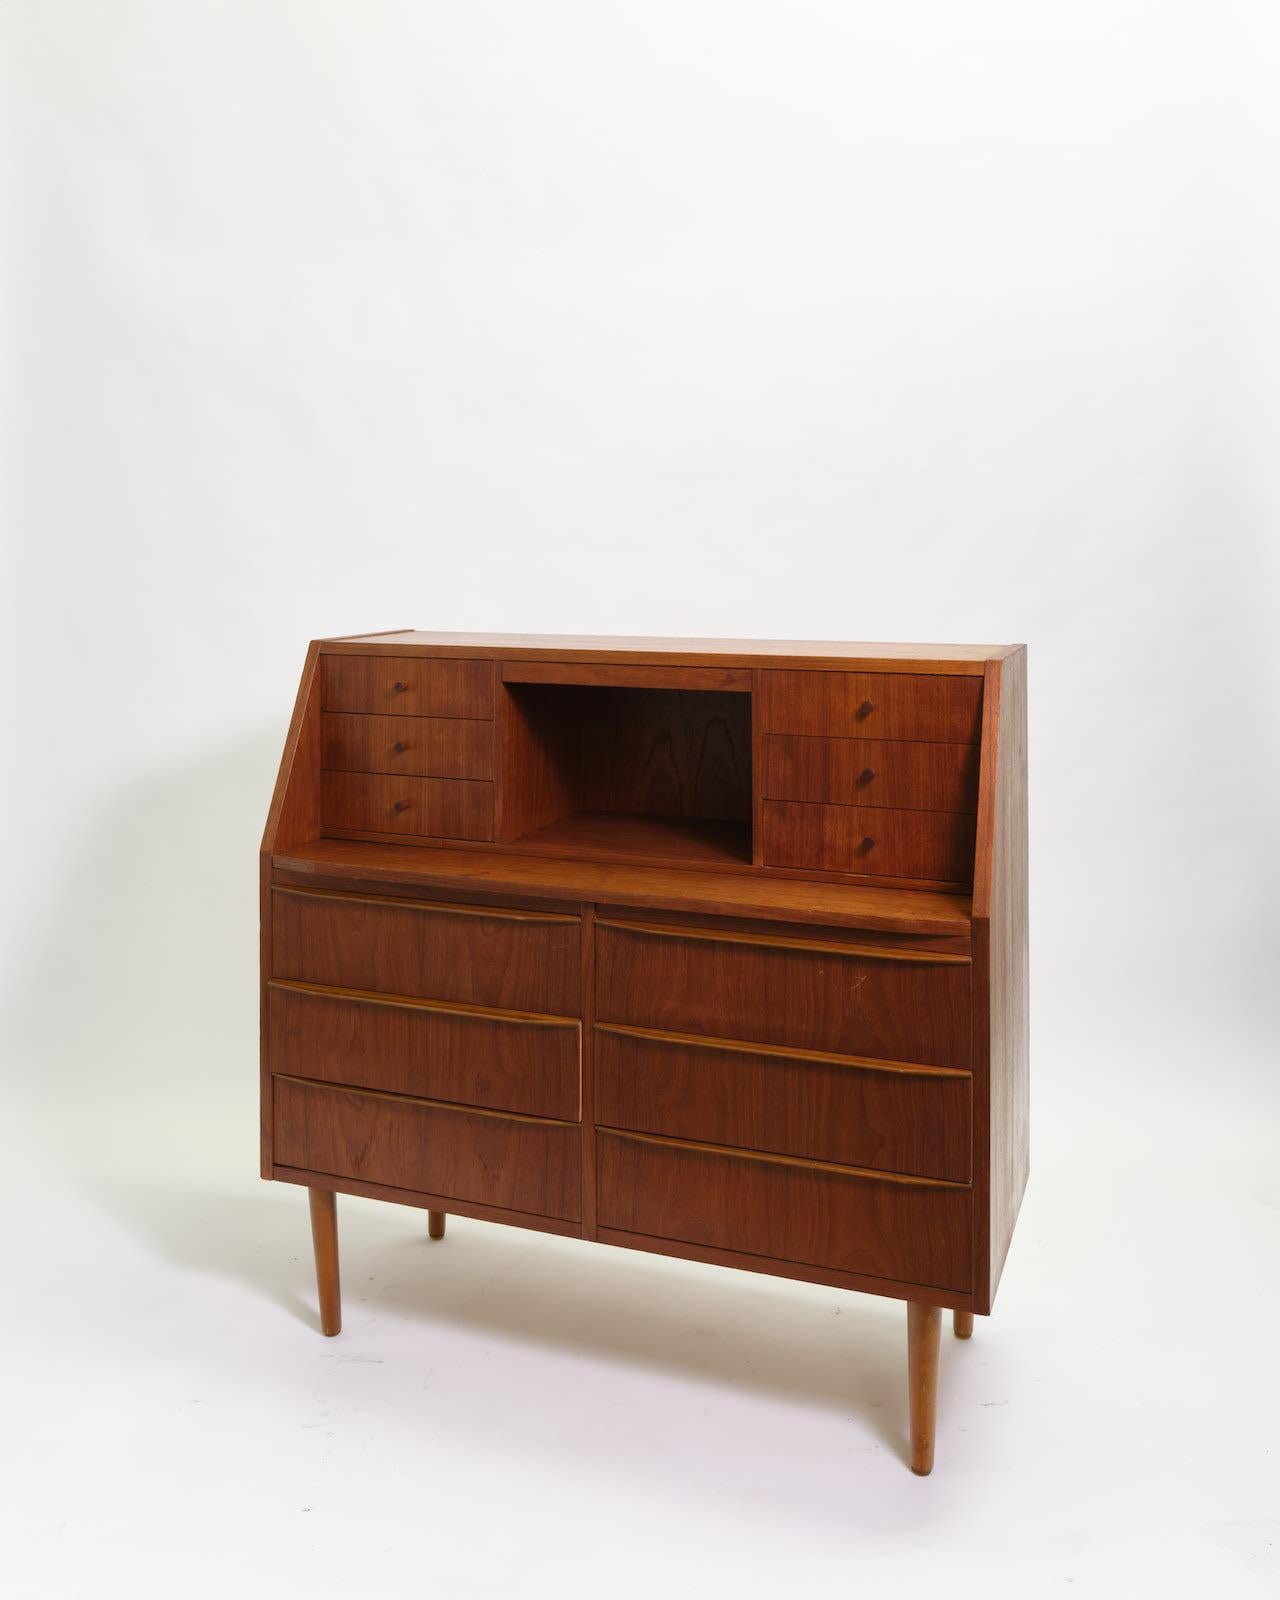 Teak bureau with six small draws and galley over six further draws. 

Created in circa 1960s/70s.

Dimensions: H98 x W100 x D40 cm.